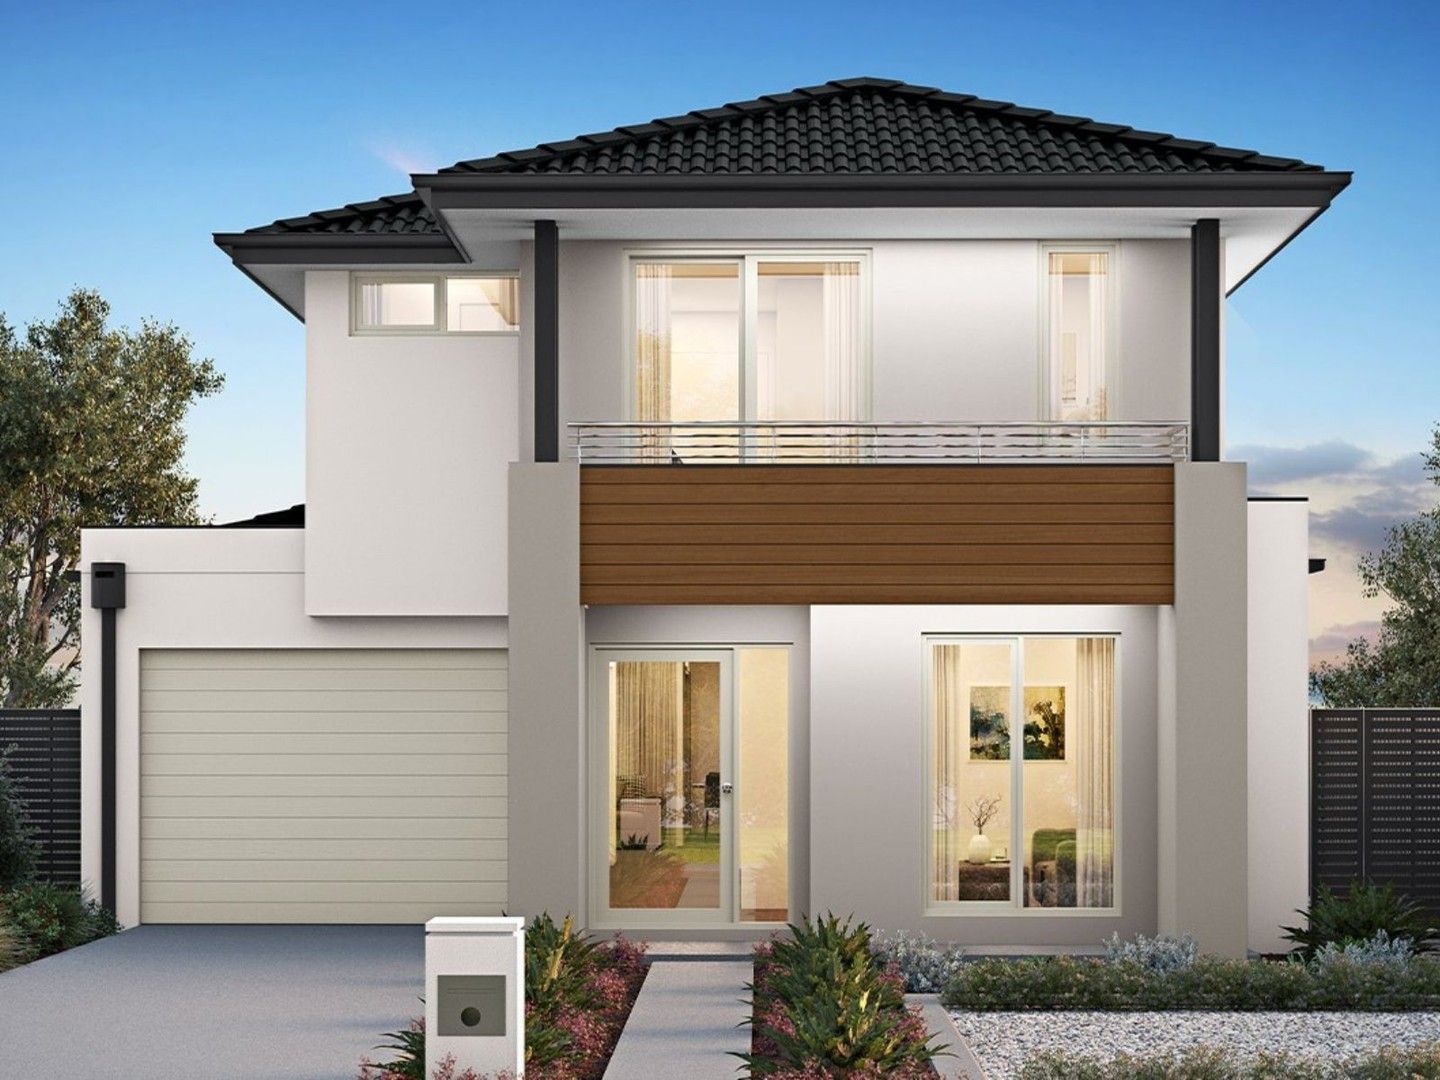 4 bedrooms New House & Land in Aquarius Way, Fixed Cost Build Contract BOX HILL NSW, 2765